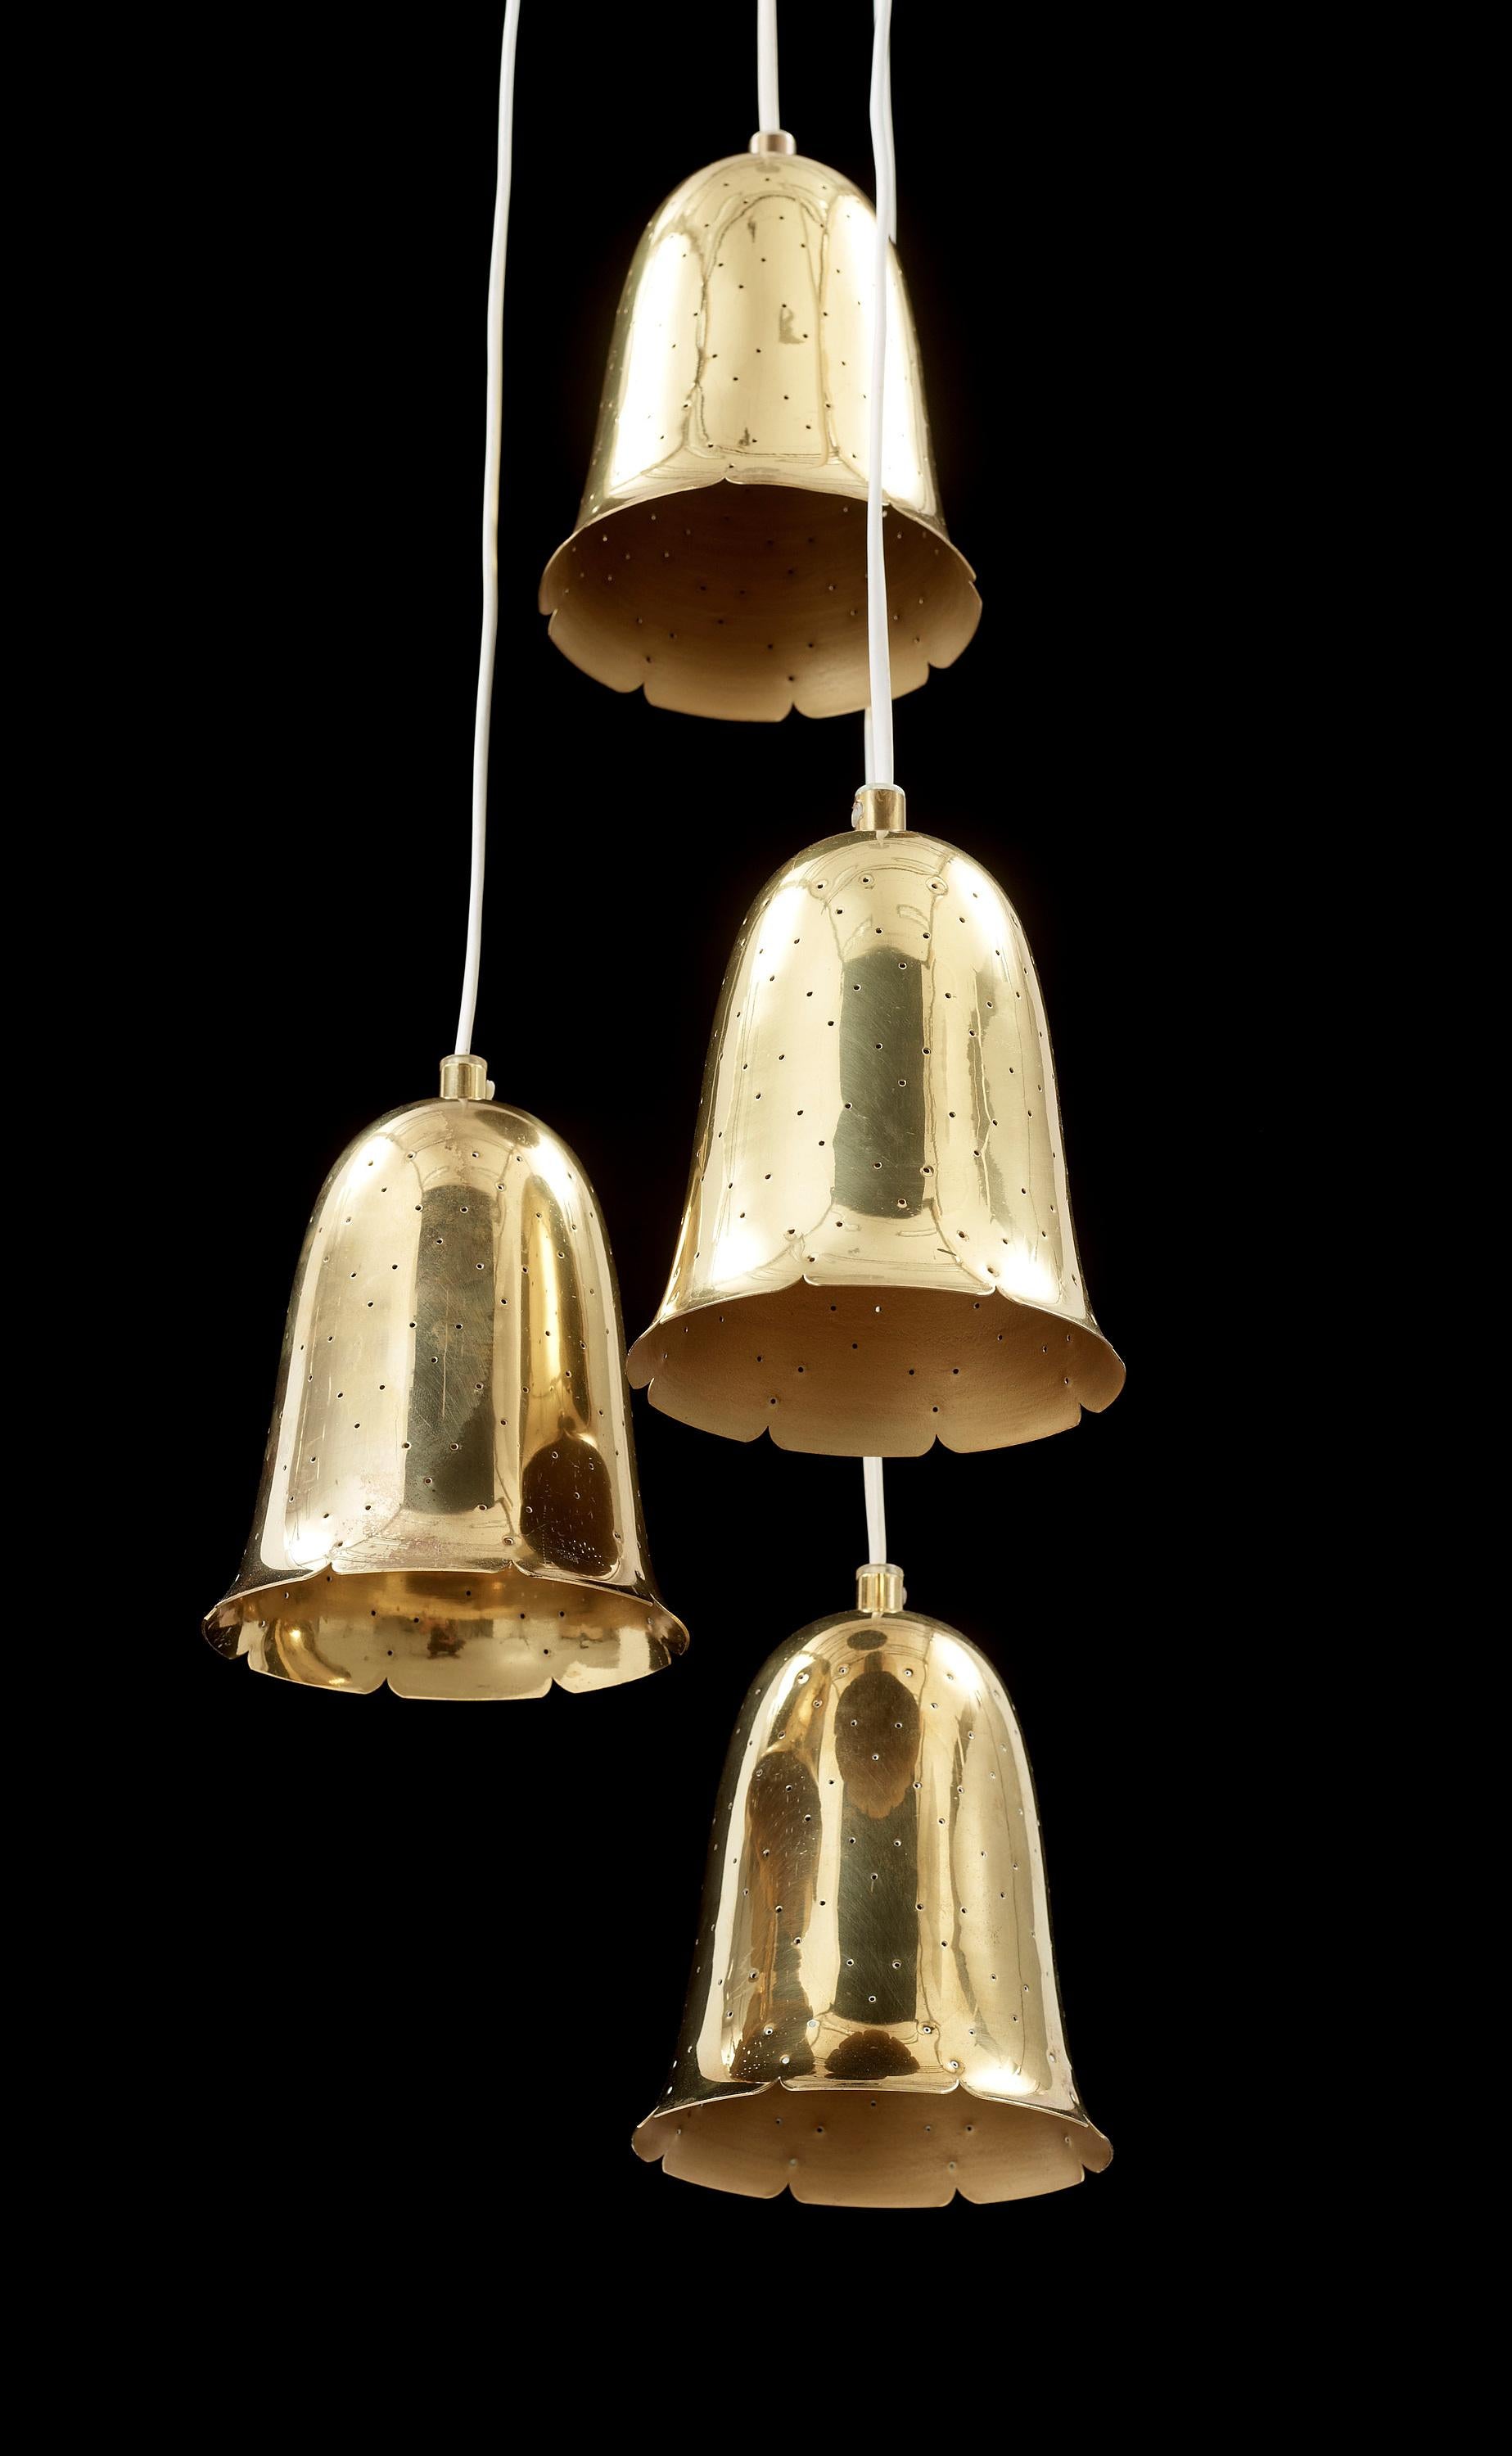 Pendant Lamps in brass by Boréns Borås, second half of the 20th century.
These lights have a very nice glow when on due to its perforated solid brass shade. Electrical function not tested.
6 items available in stock. price for 1 item
Good vintage